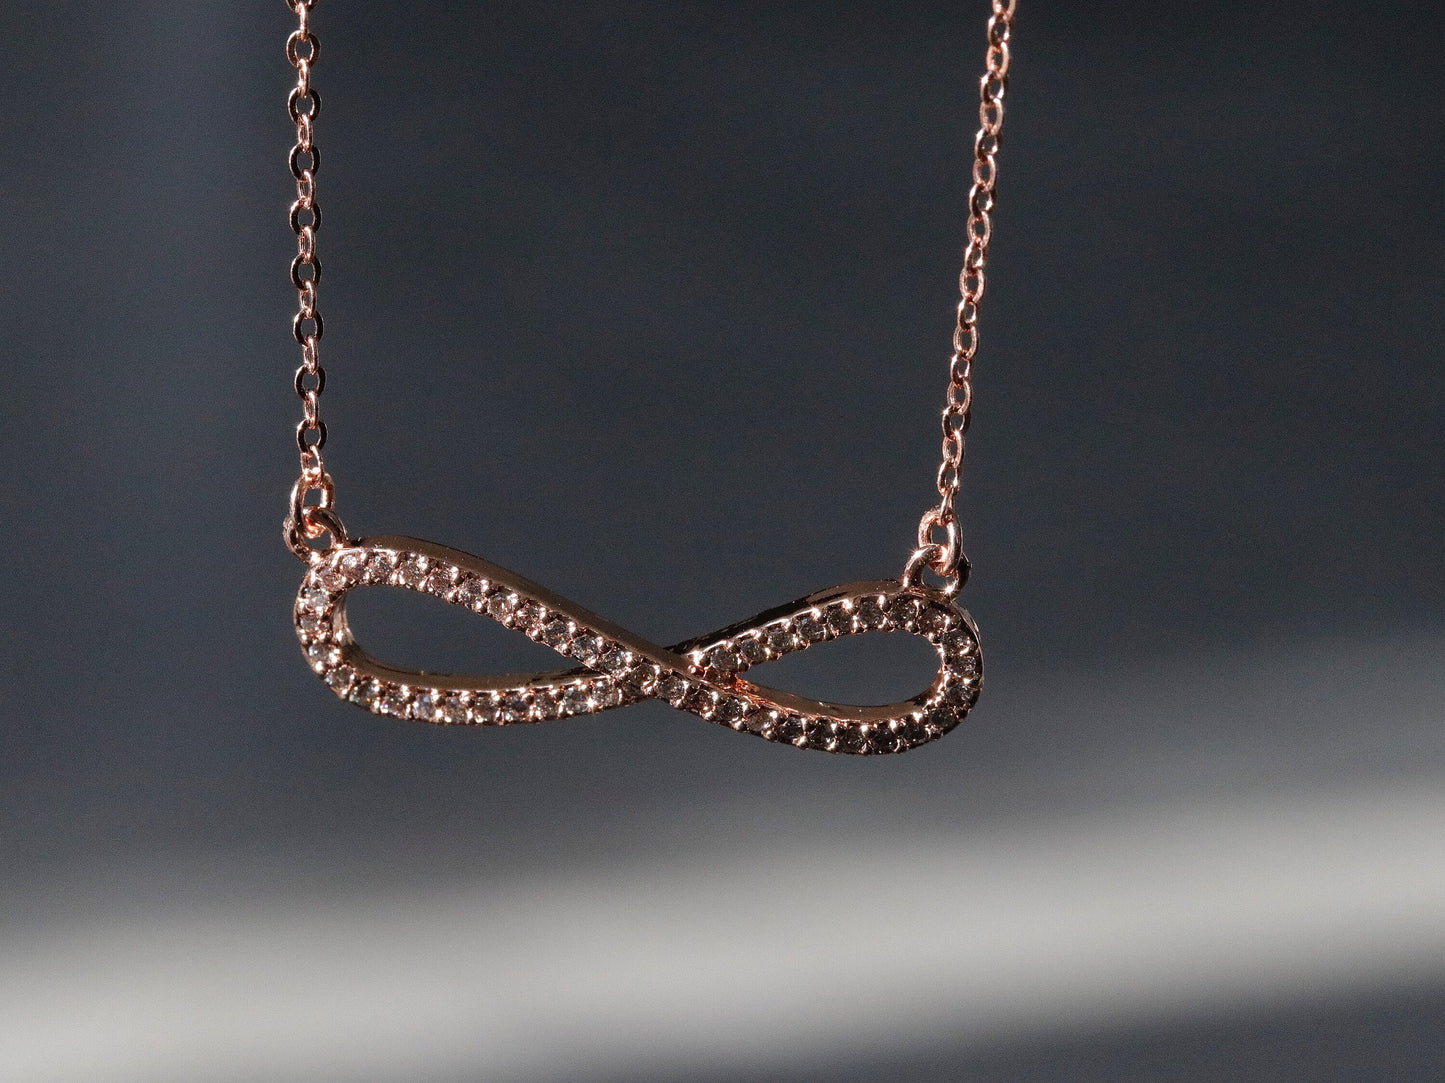 Mother's Day Gift, Marvelous Mum Infinity Symbol Necklace Handcraft With 18K White Gold /Rose gold /Gold Plated /Symbology Mum birthday gift